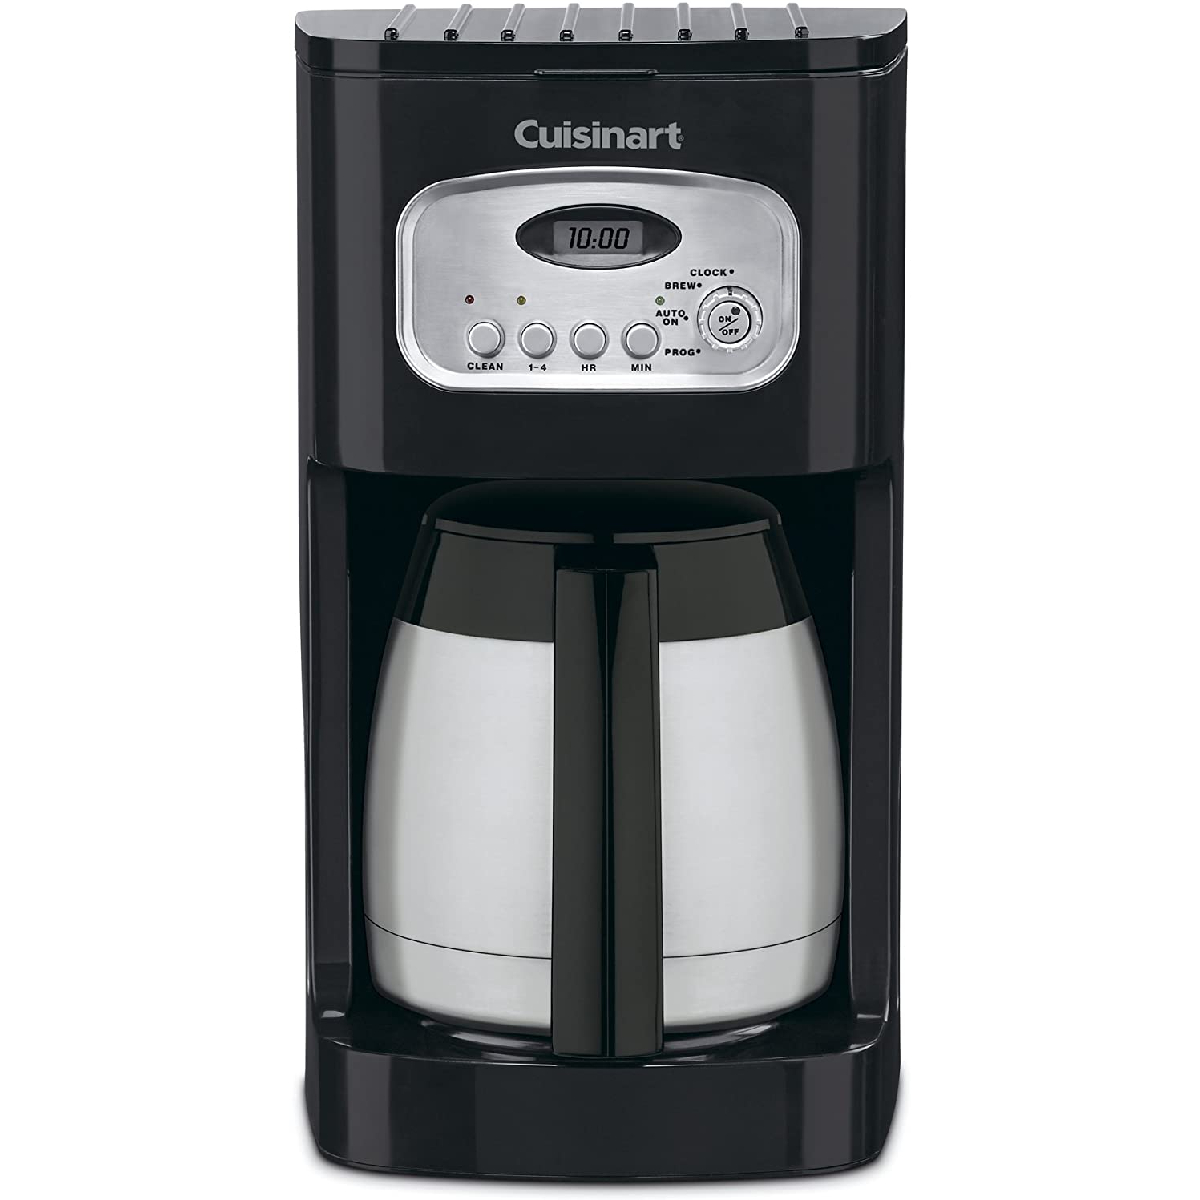 Cuisinart DCC-1150bk Classic Thermal Programmable Coffee Maker